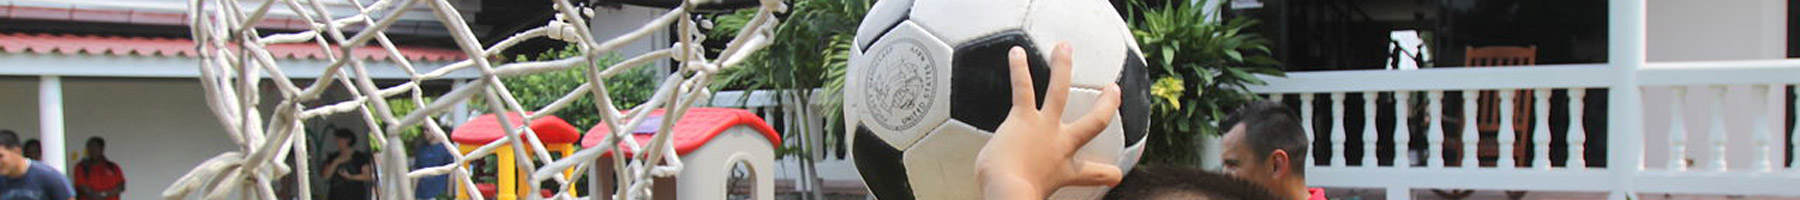 A child playing basketball with a soccer ball; in this slice of the image, only his hands and the ball are visible.